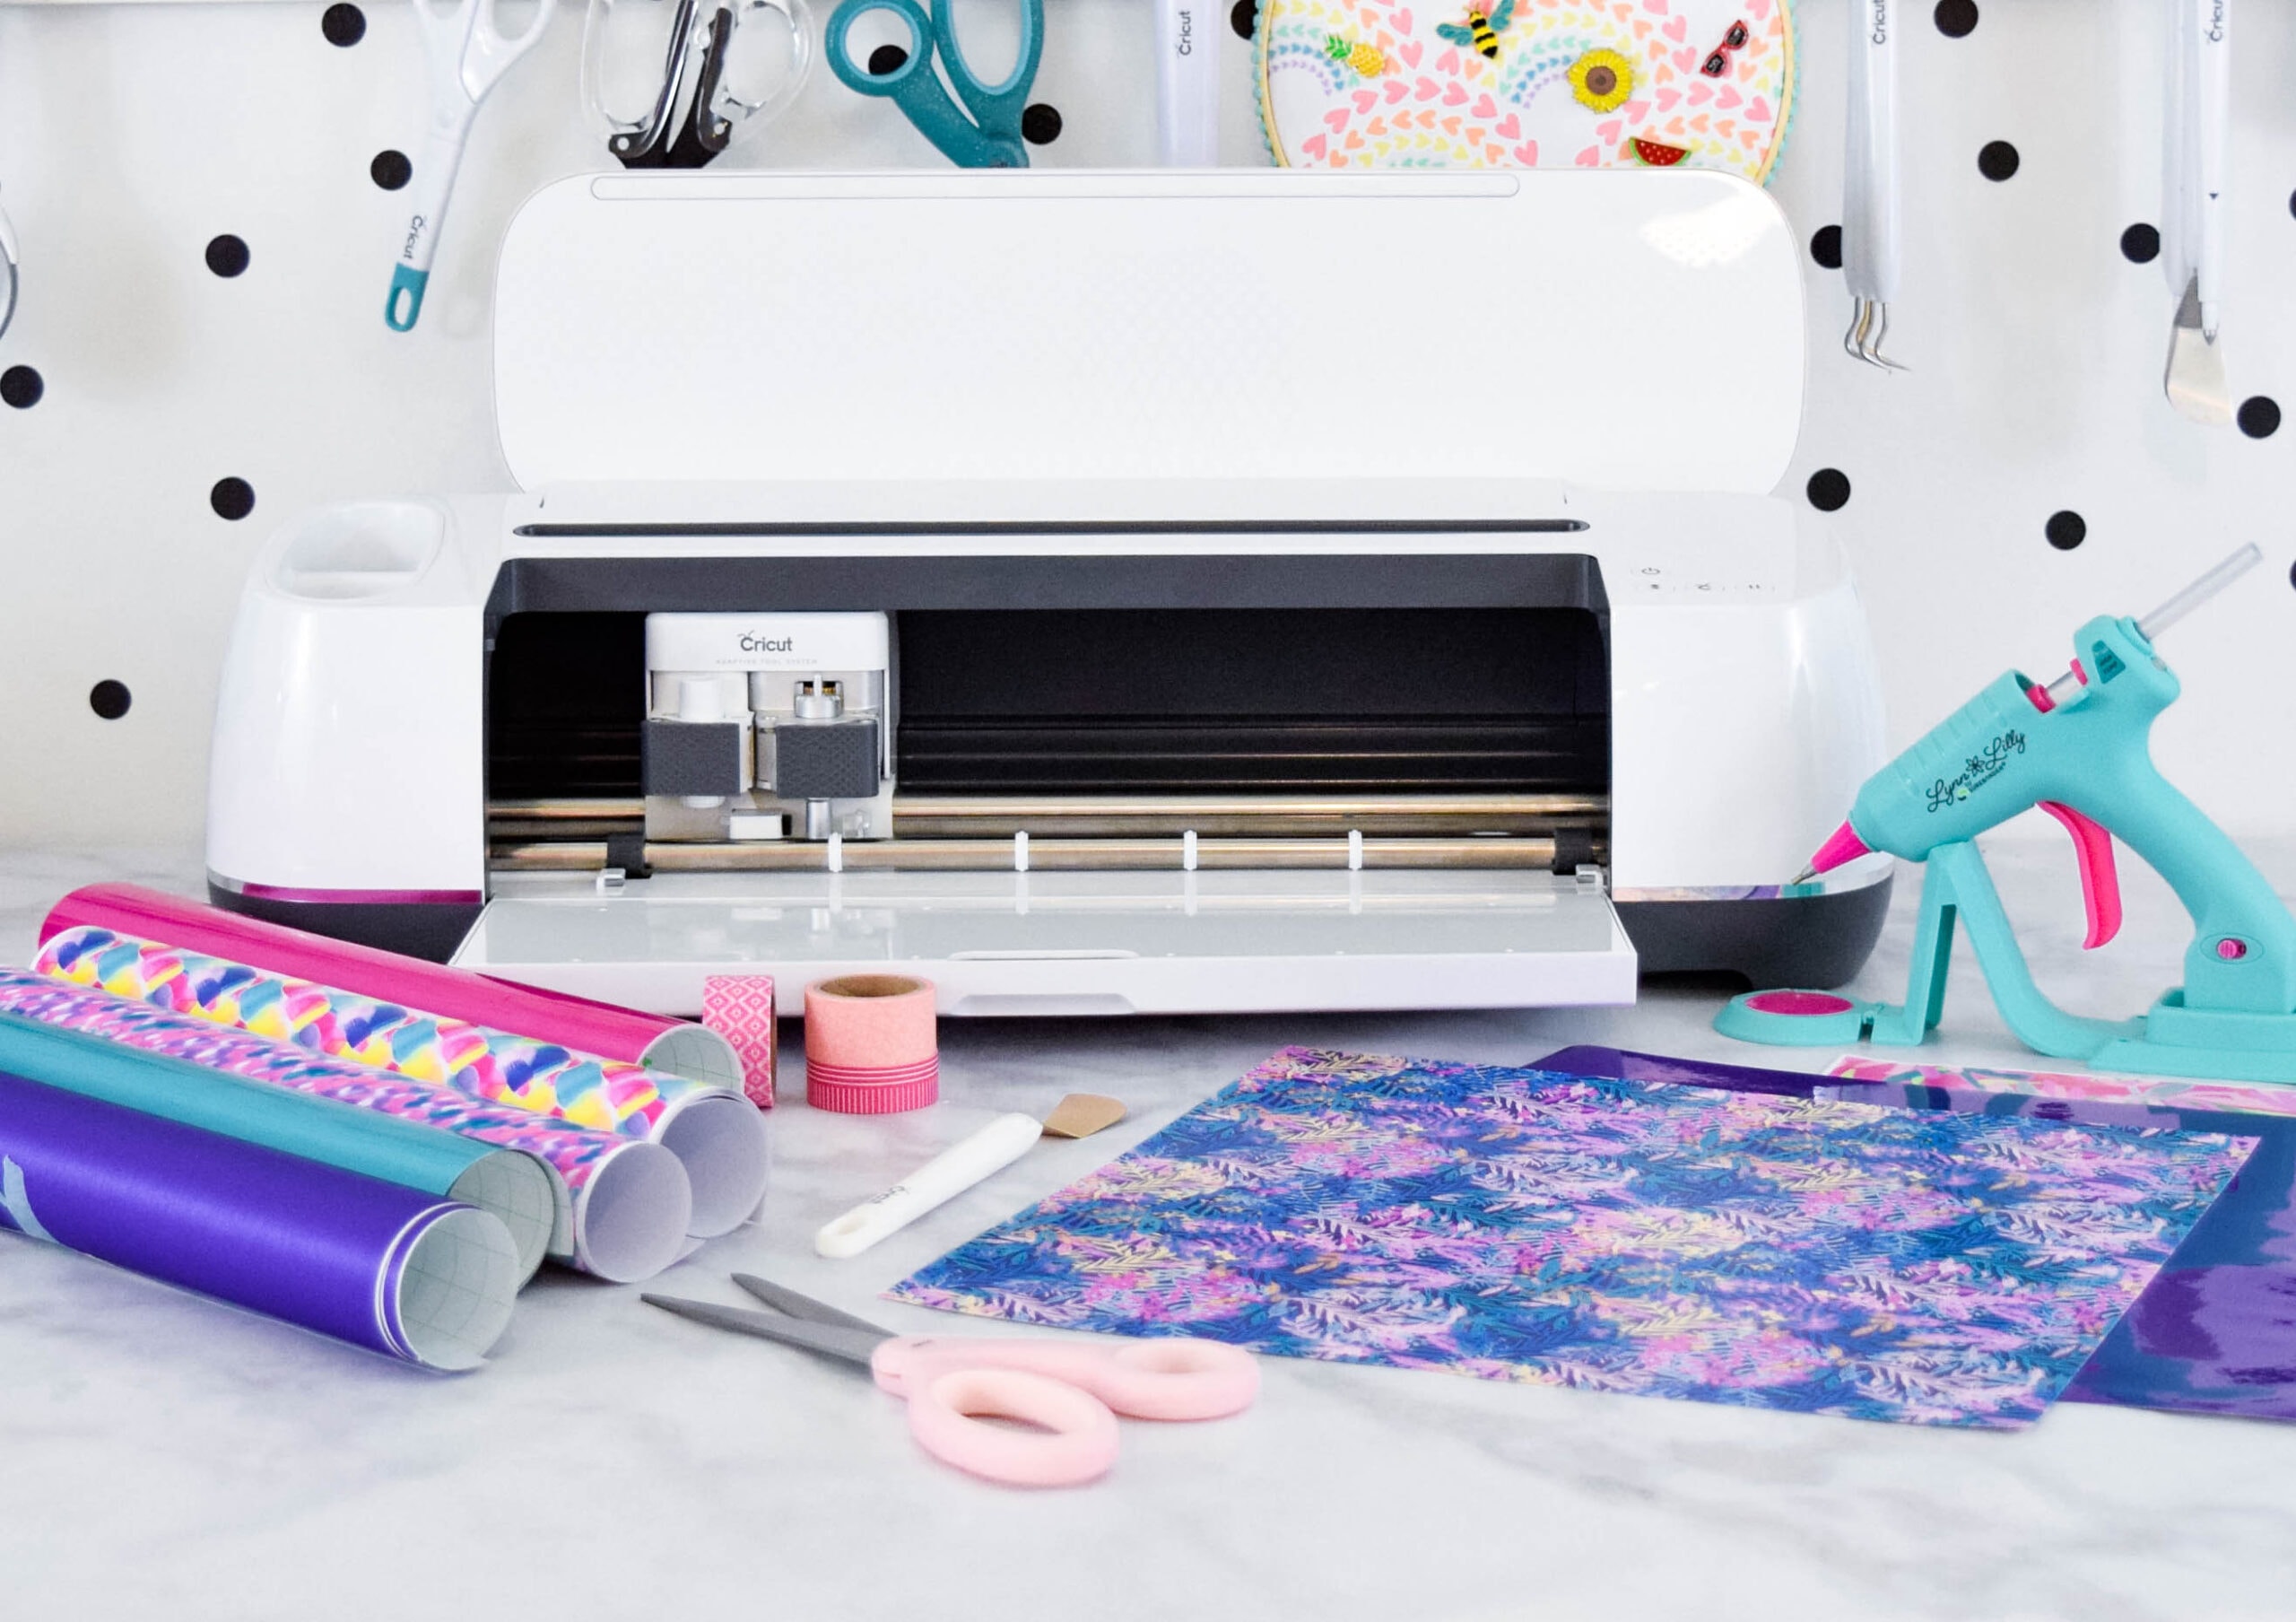 How To Use a Cricut Cutter: A Simple Guide to Getting Started with Cricut